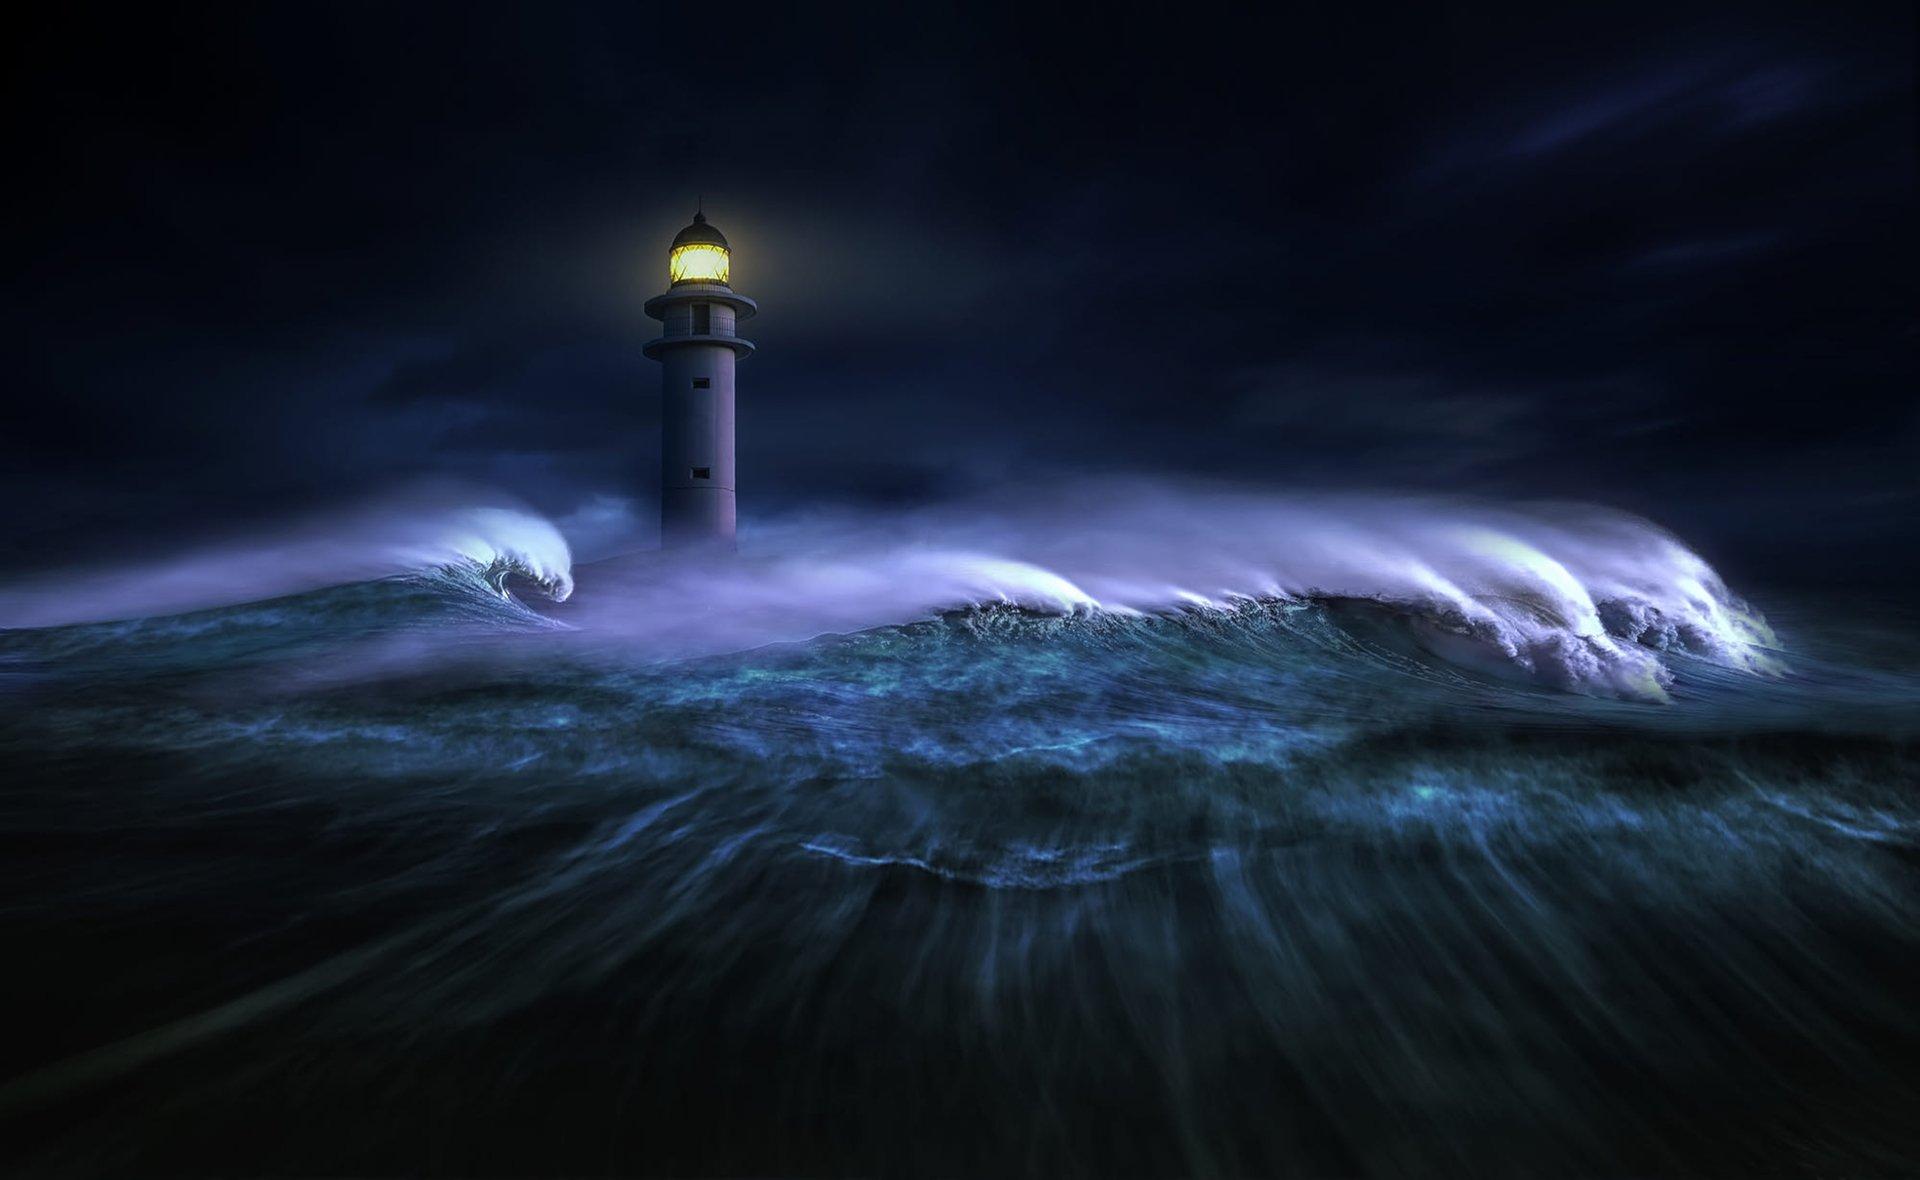 Lighthouse in Stormy Sea HD Wallpaper. Background Image